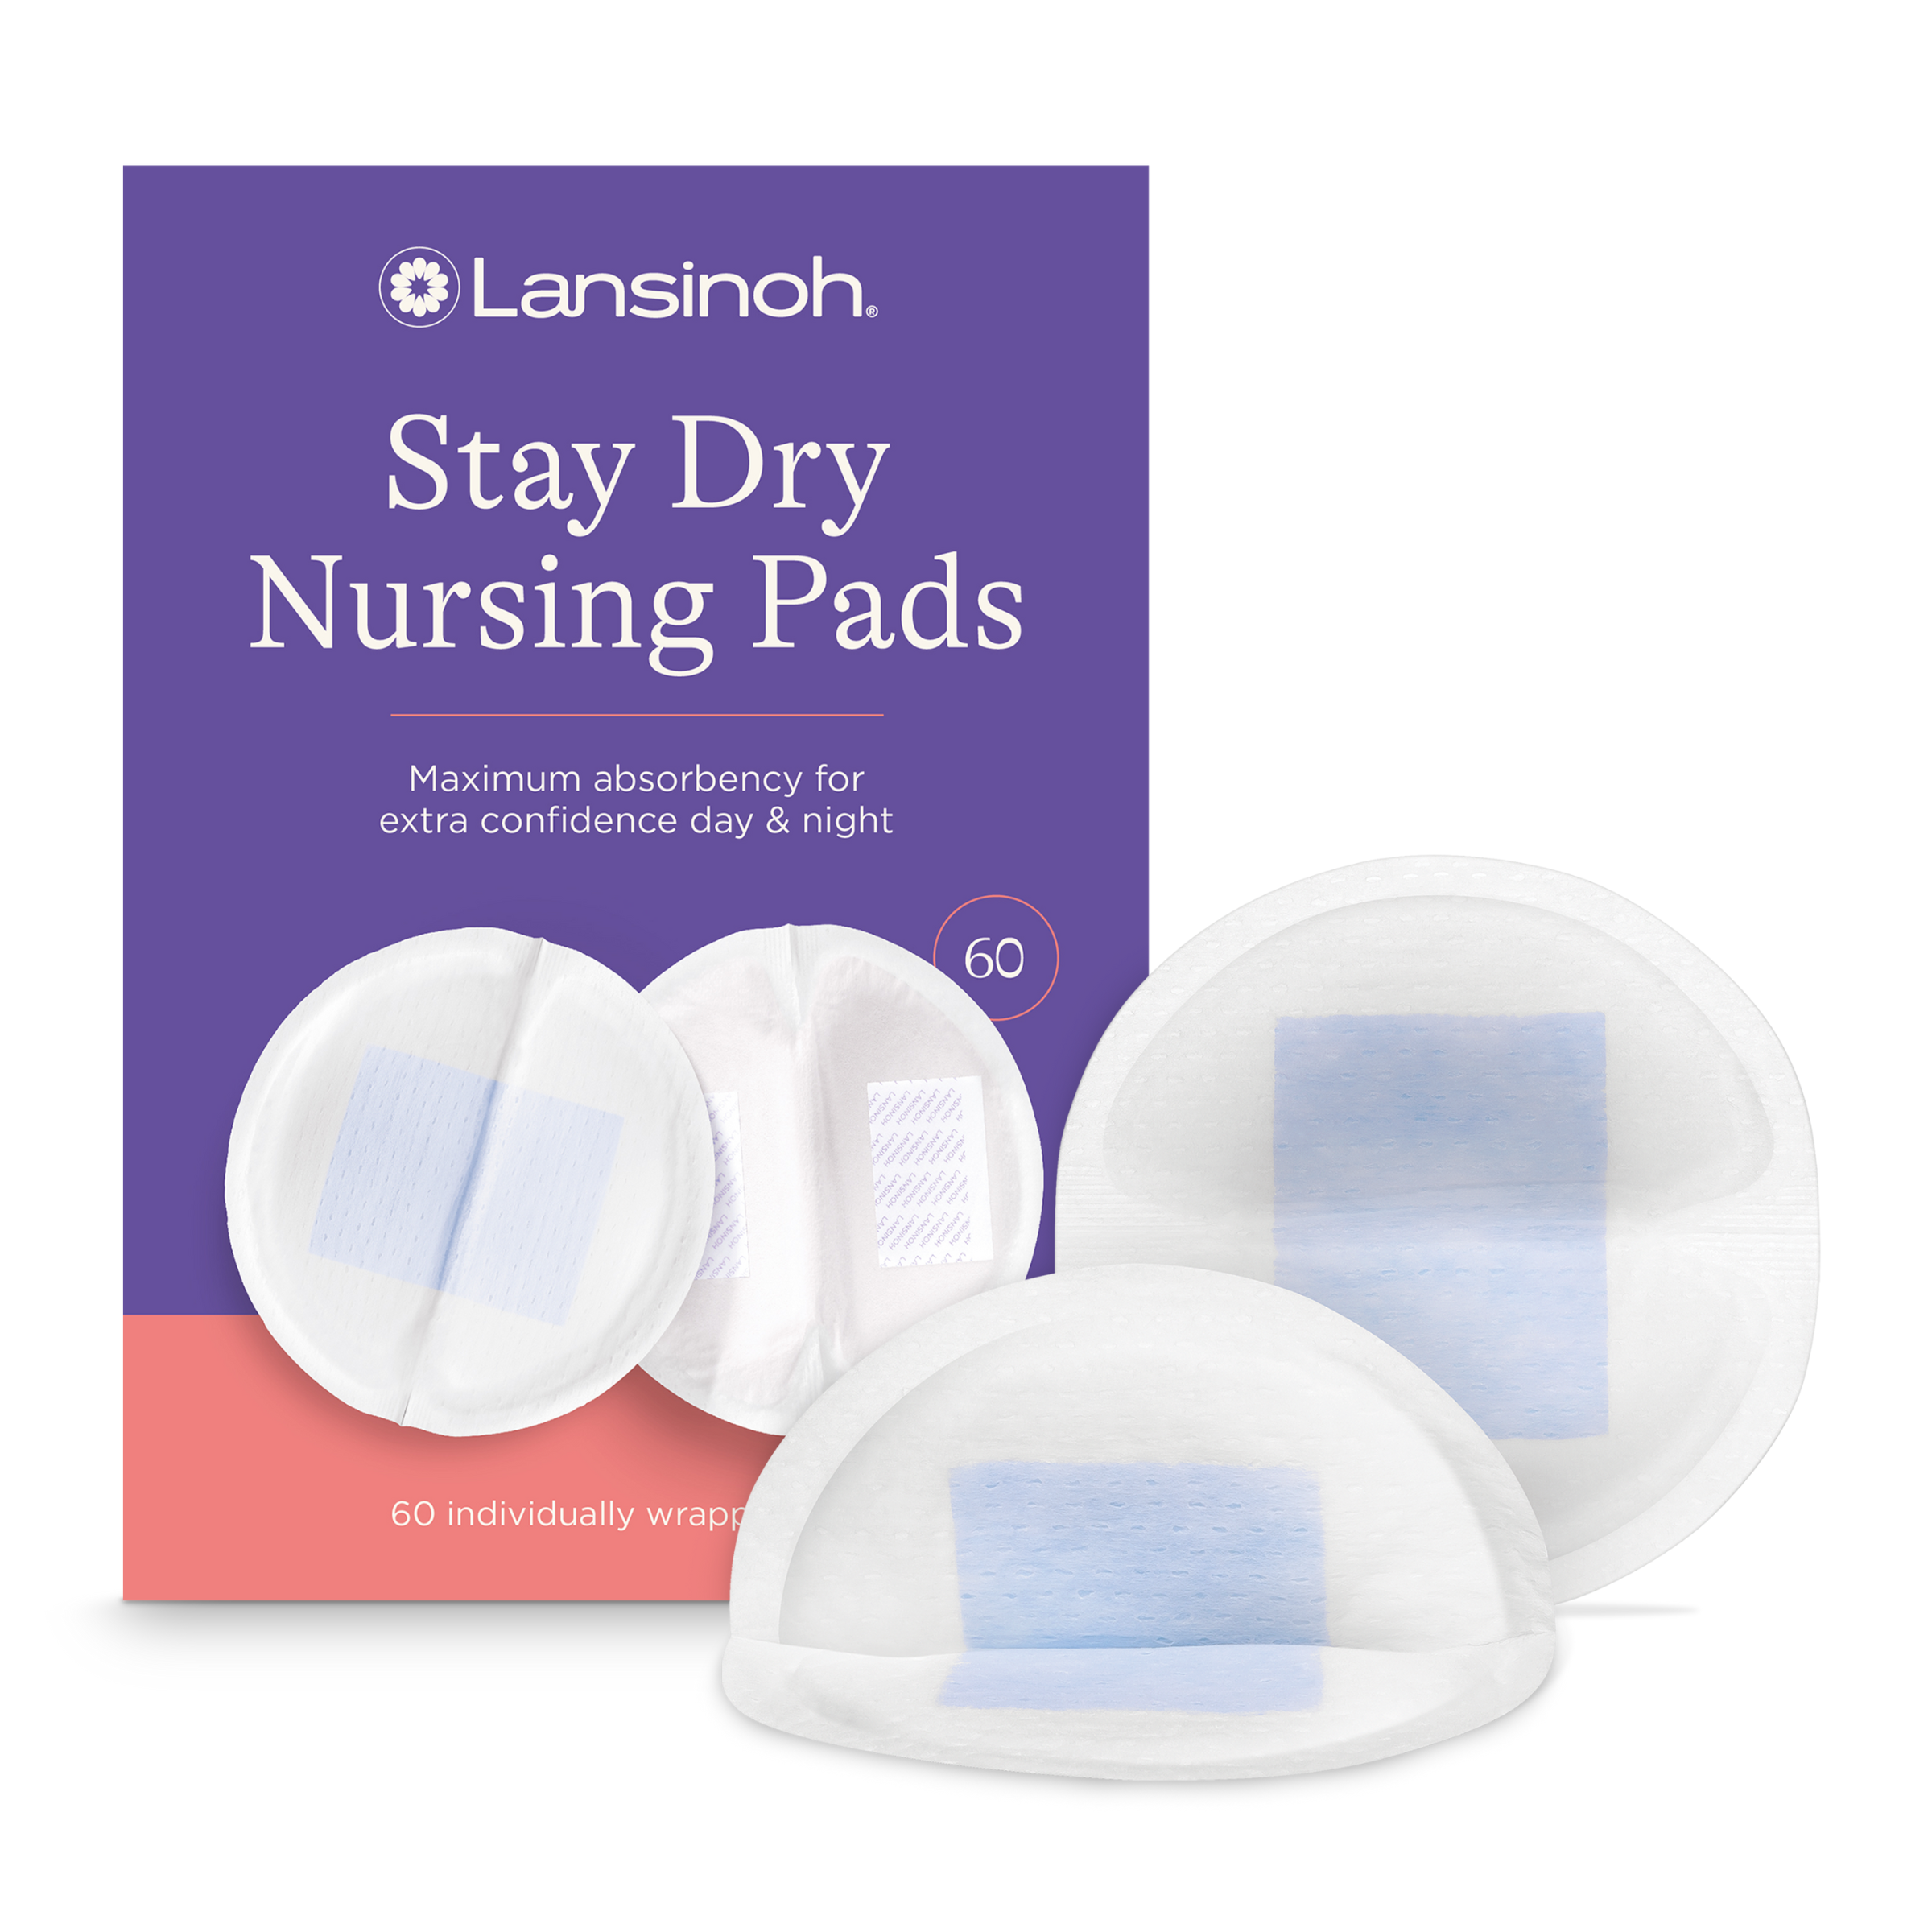 Lansinoh Stay Dry Disposable Nursing Pads for Breastfeeding, 60 Count - image 1 of 11